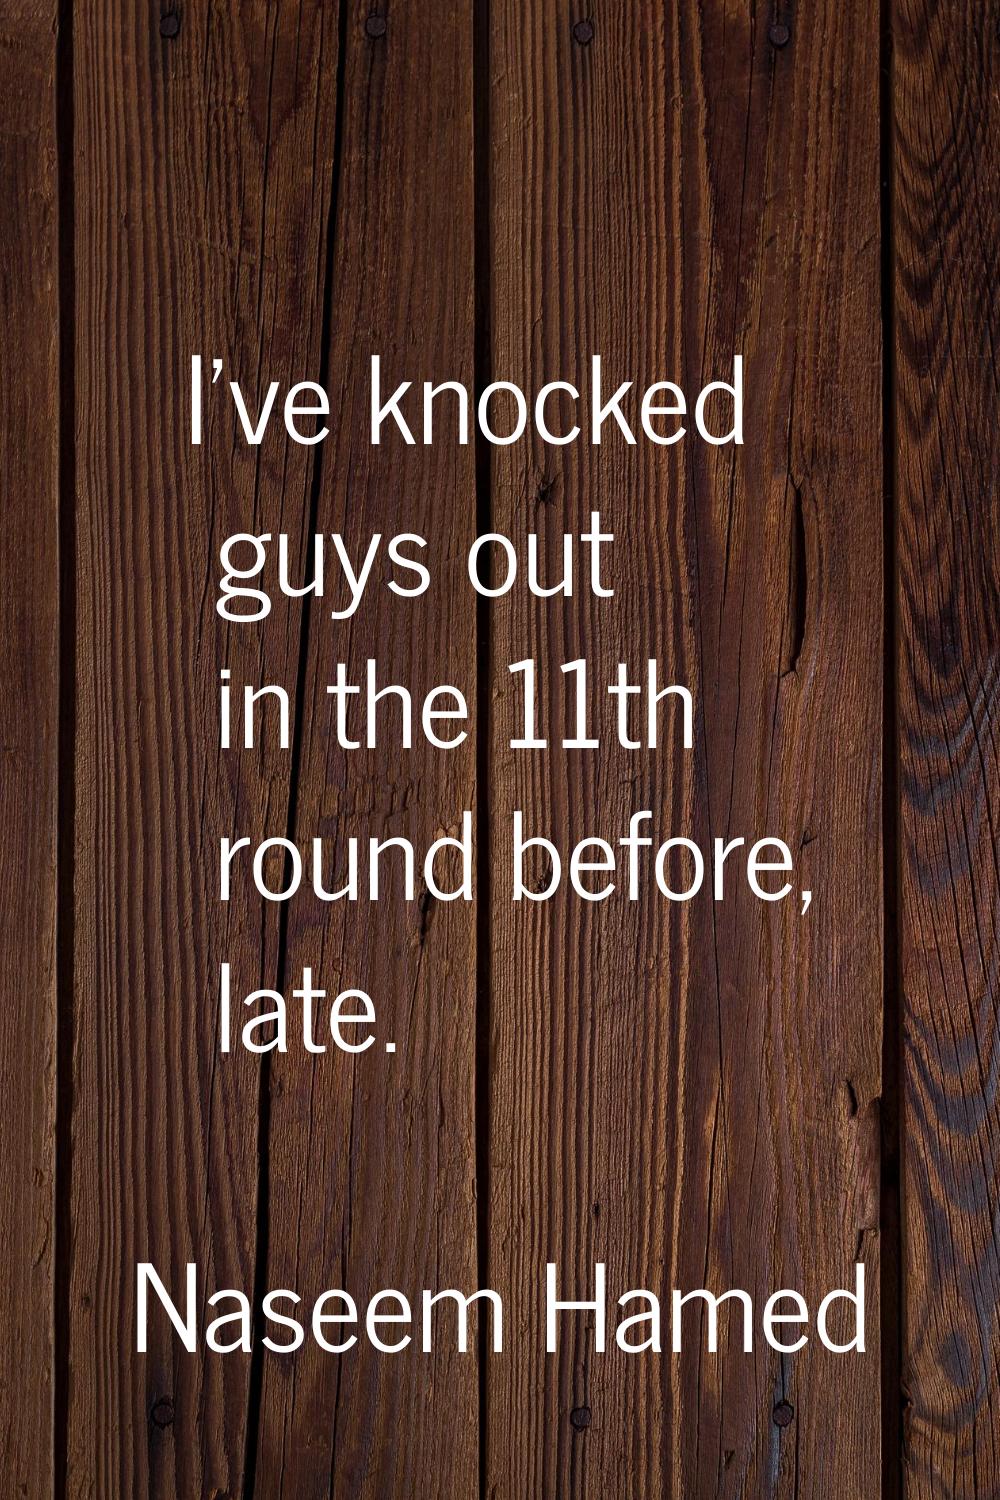 I've knocked guys out in the 11th round before, late.